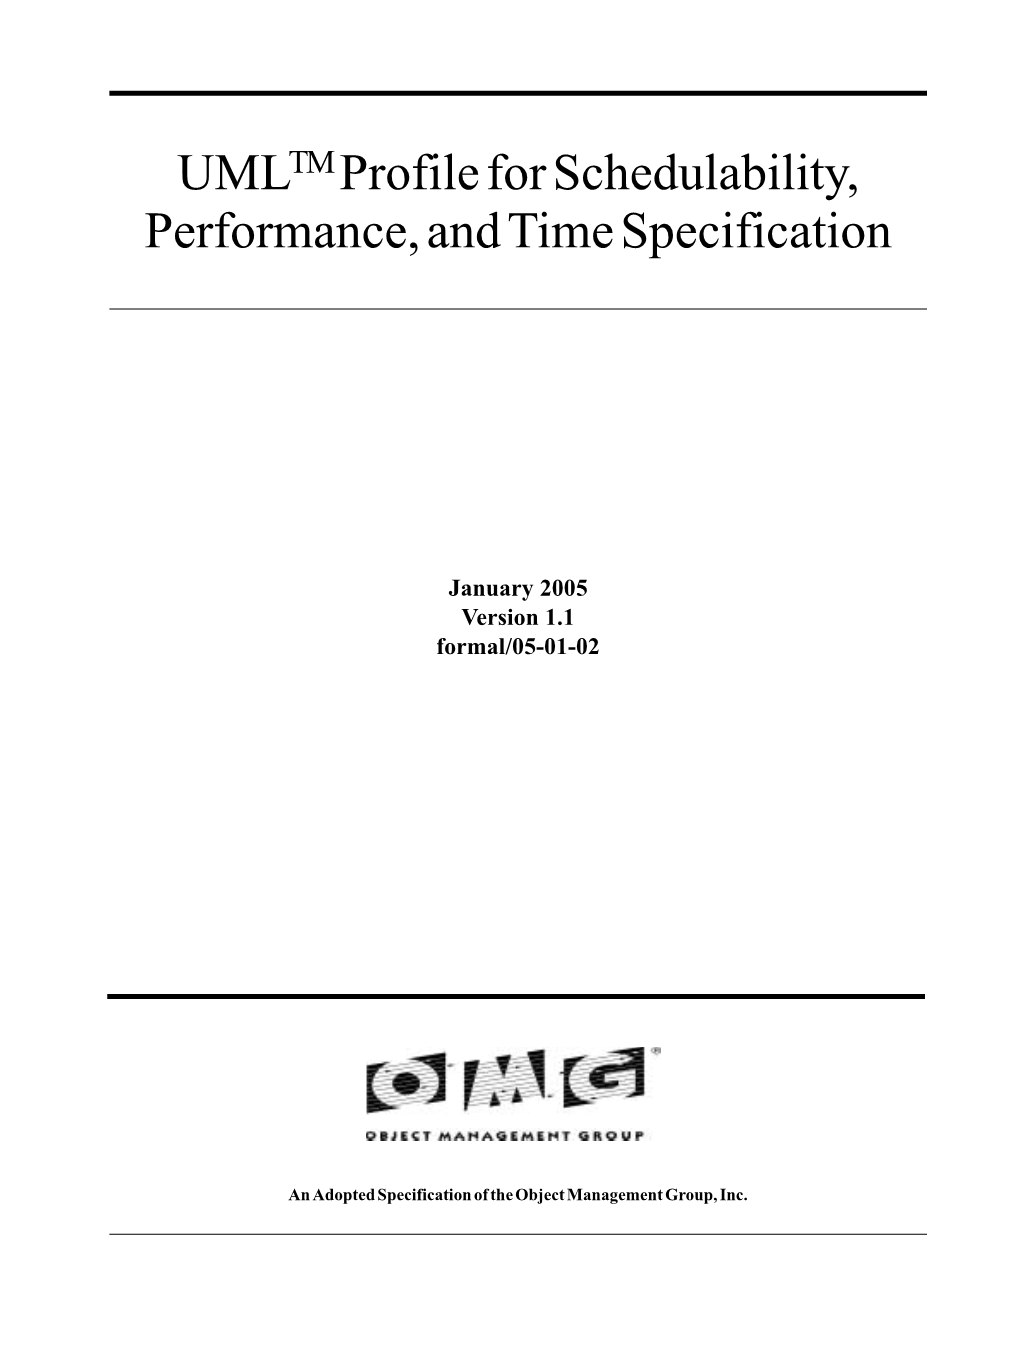 UML Profile for Schedulability, Performance, and Time Specification